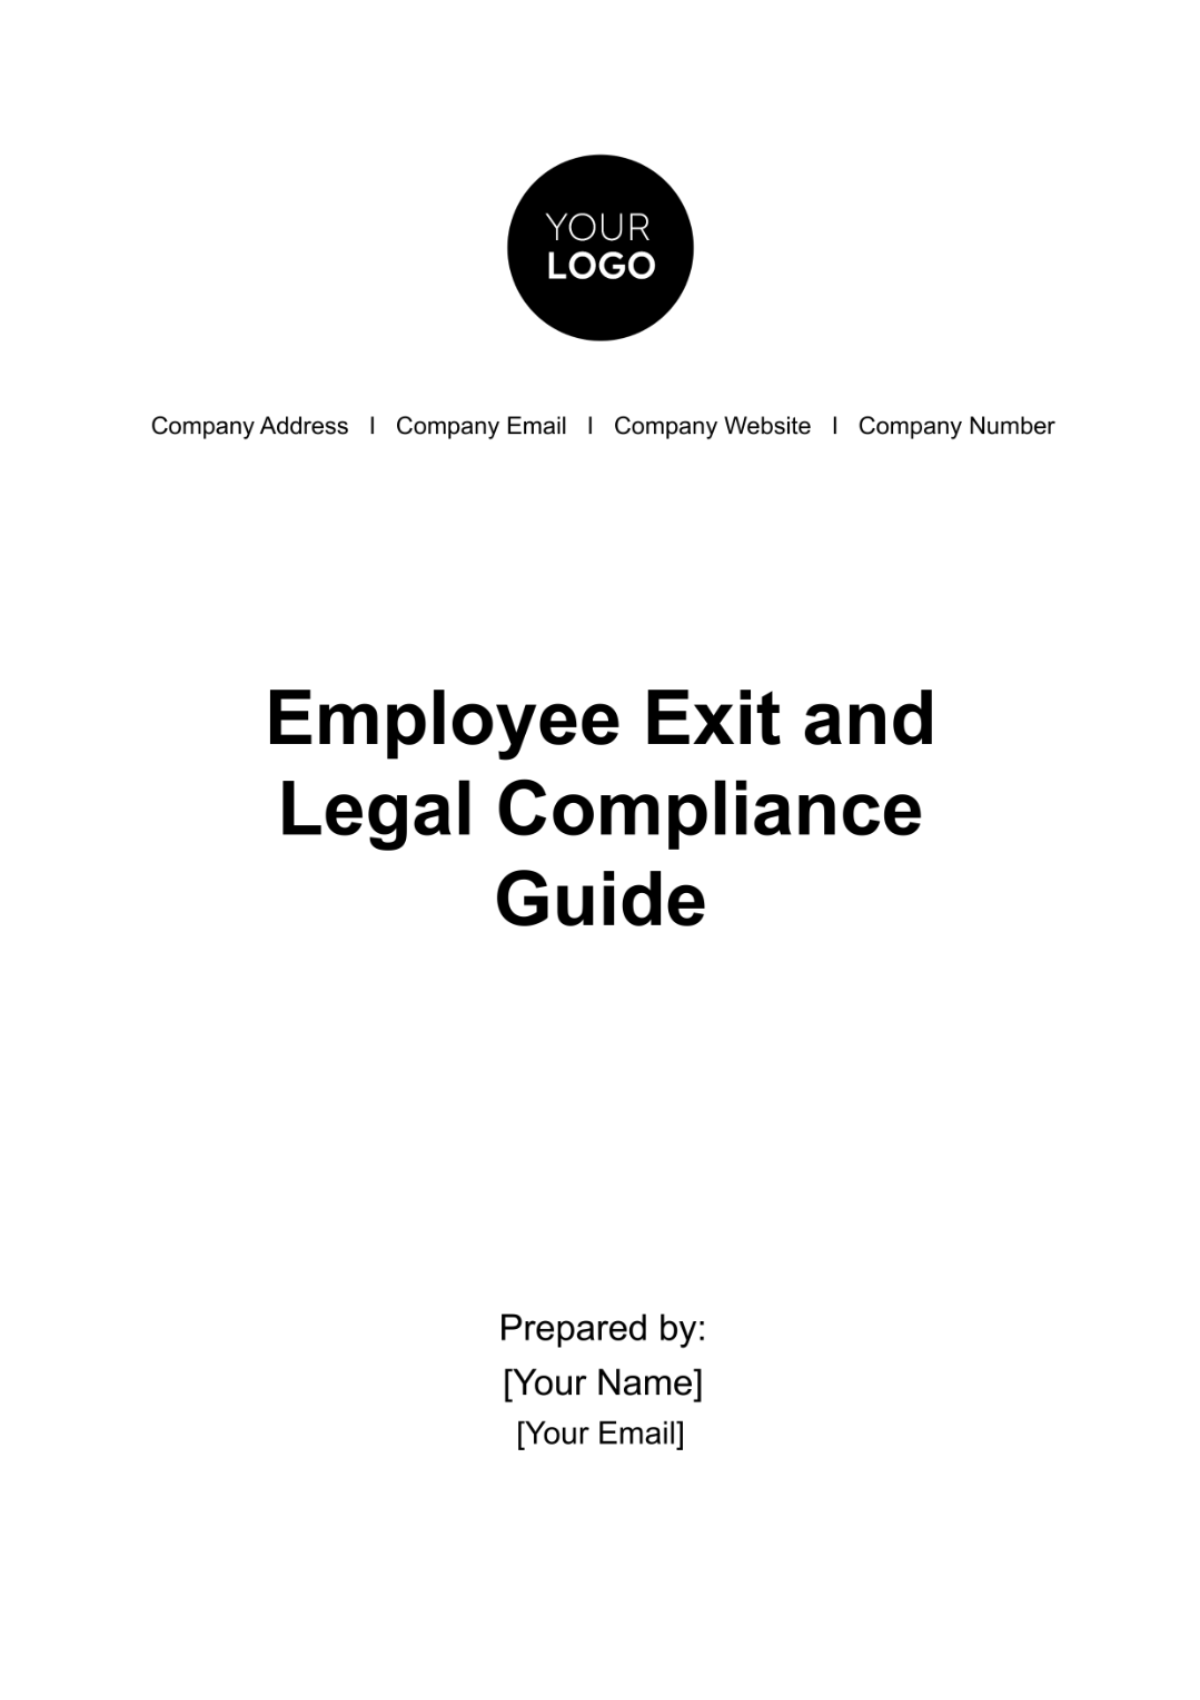 Employee Exit and Legal Compliance Guide HR Template